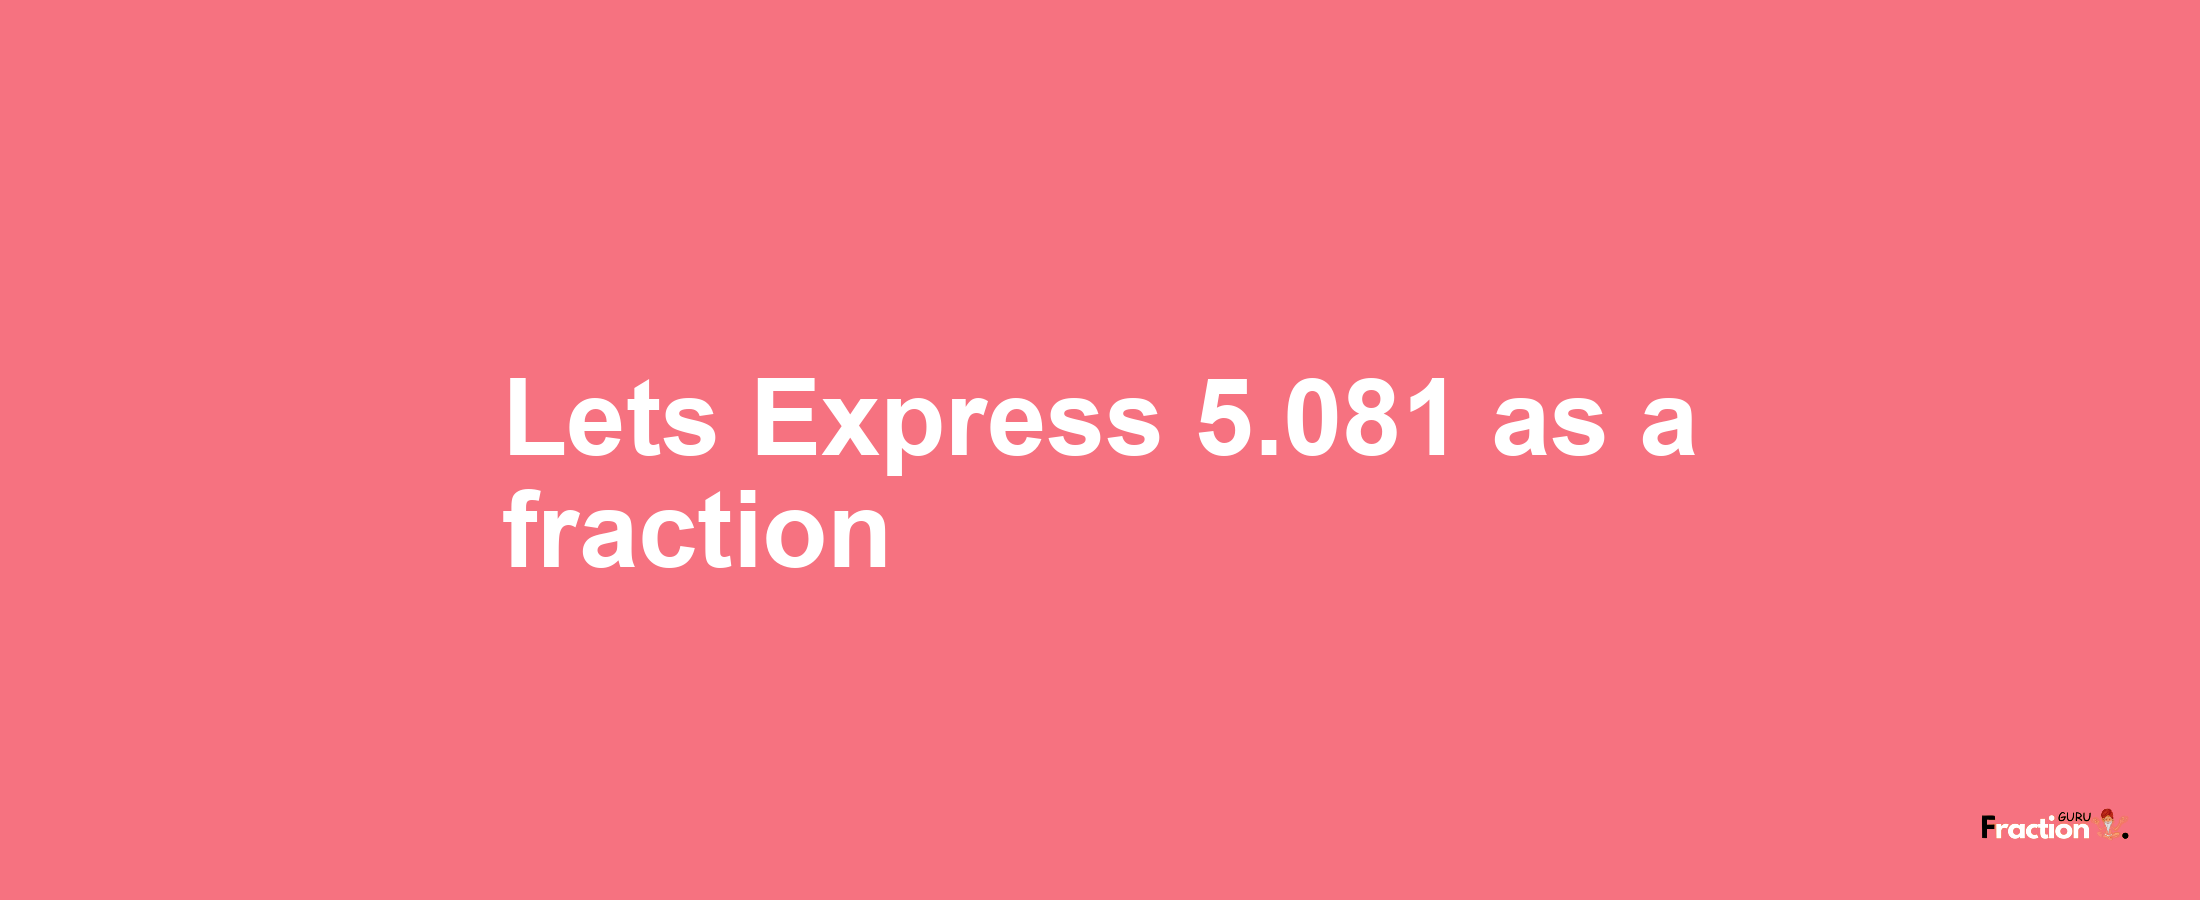 Lets Express 5.081 as afraction